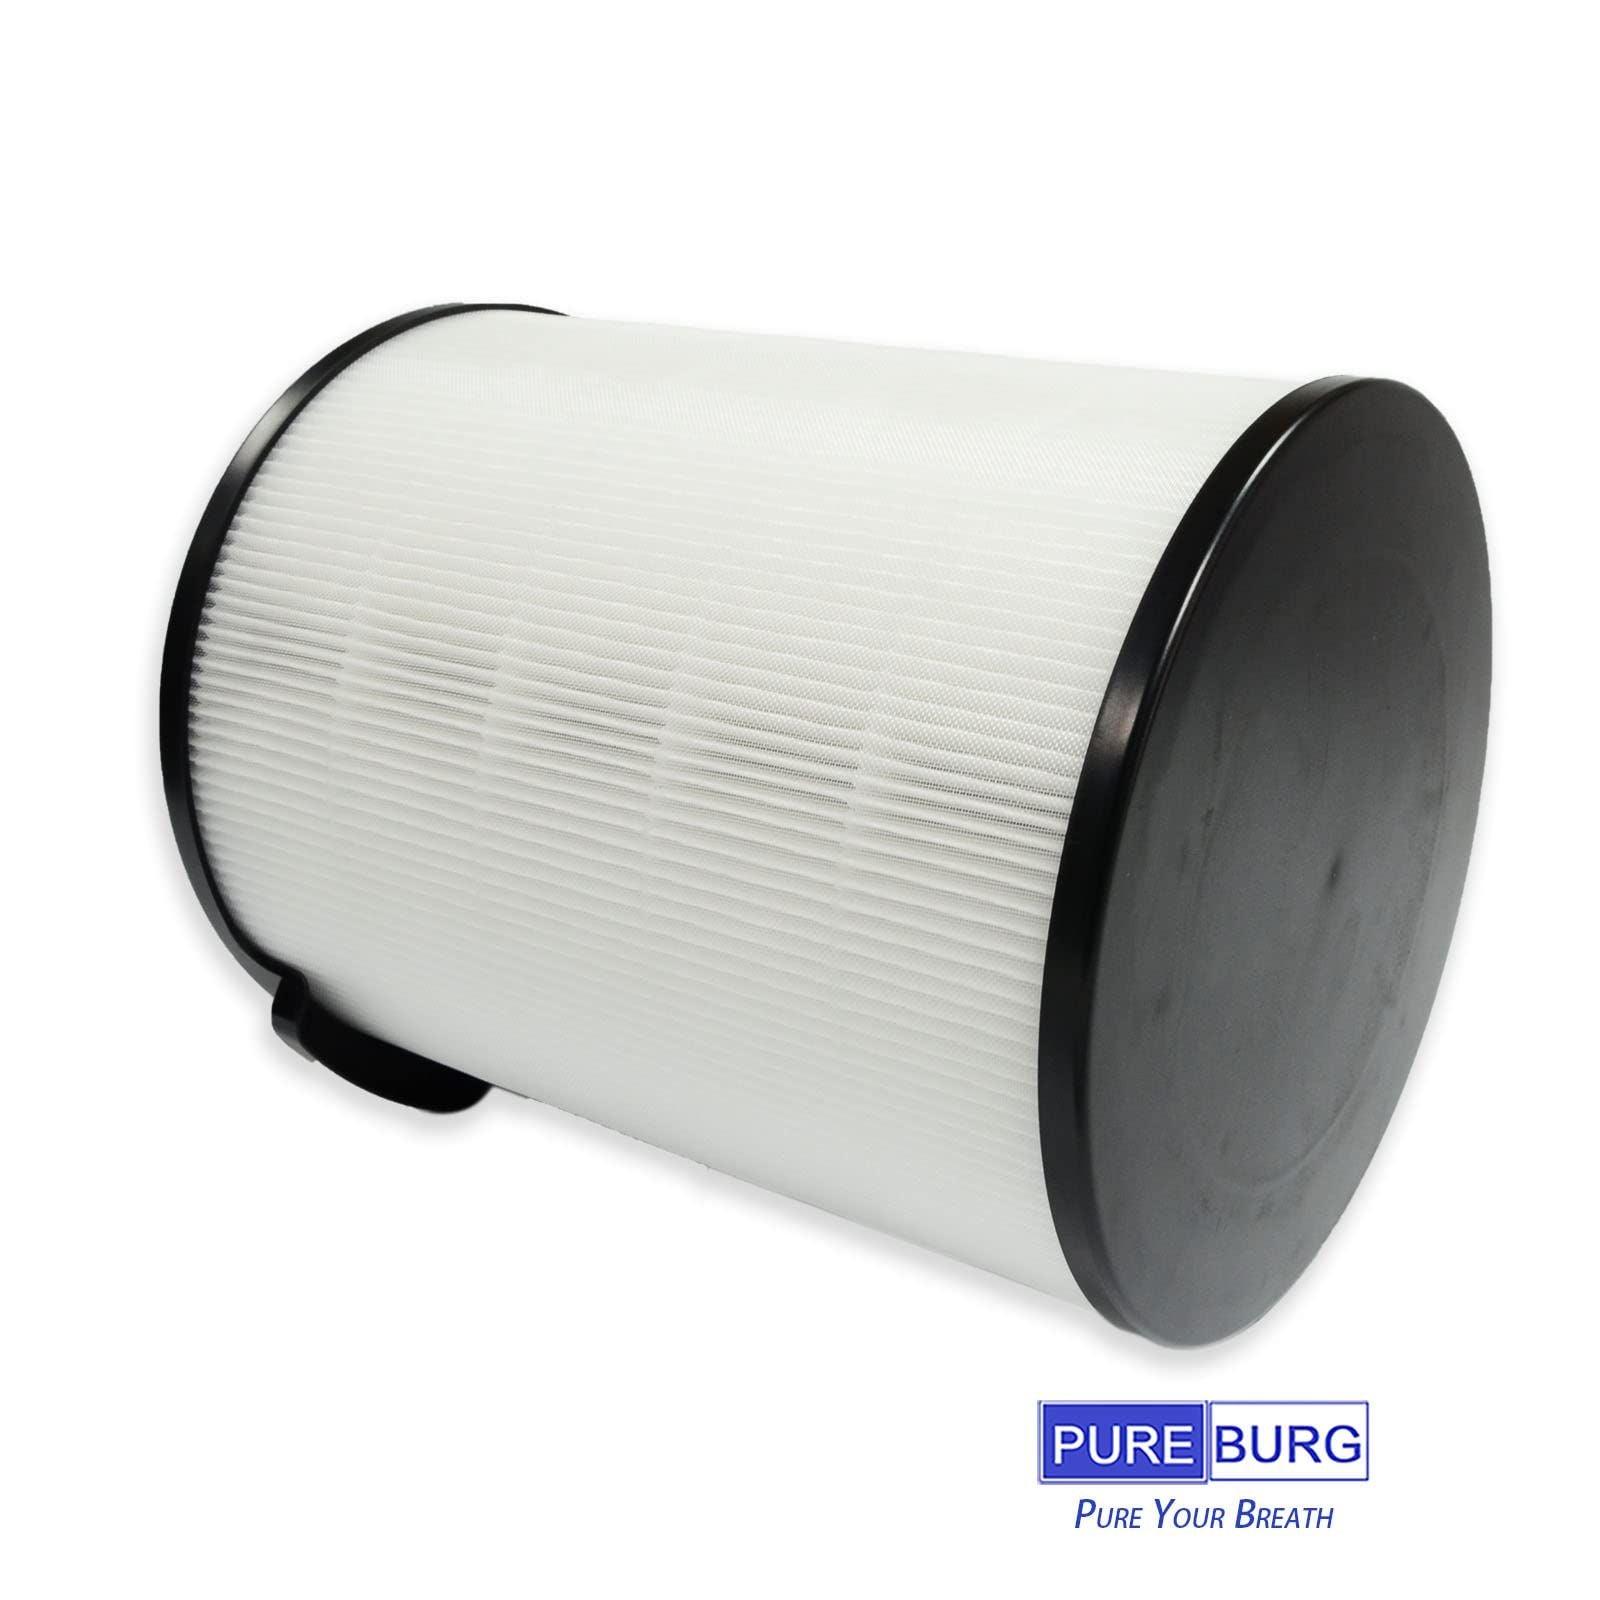 PUREBURG Replacement HEPA Filter Compatible with PHILIPS 2000i Series Air Purifier AC2936/33, Part Number FY2180/30 2